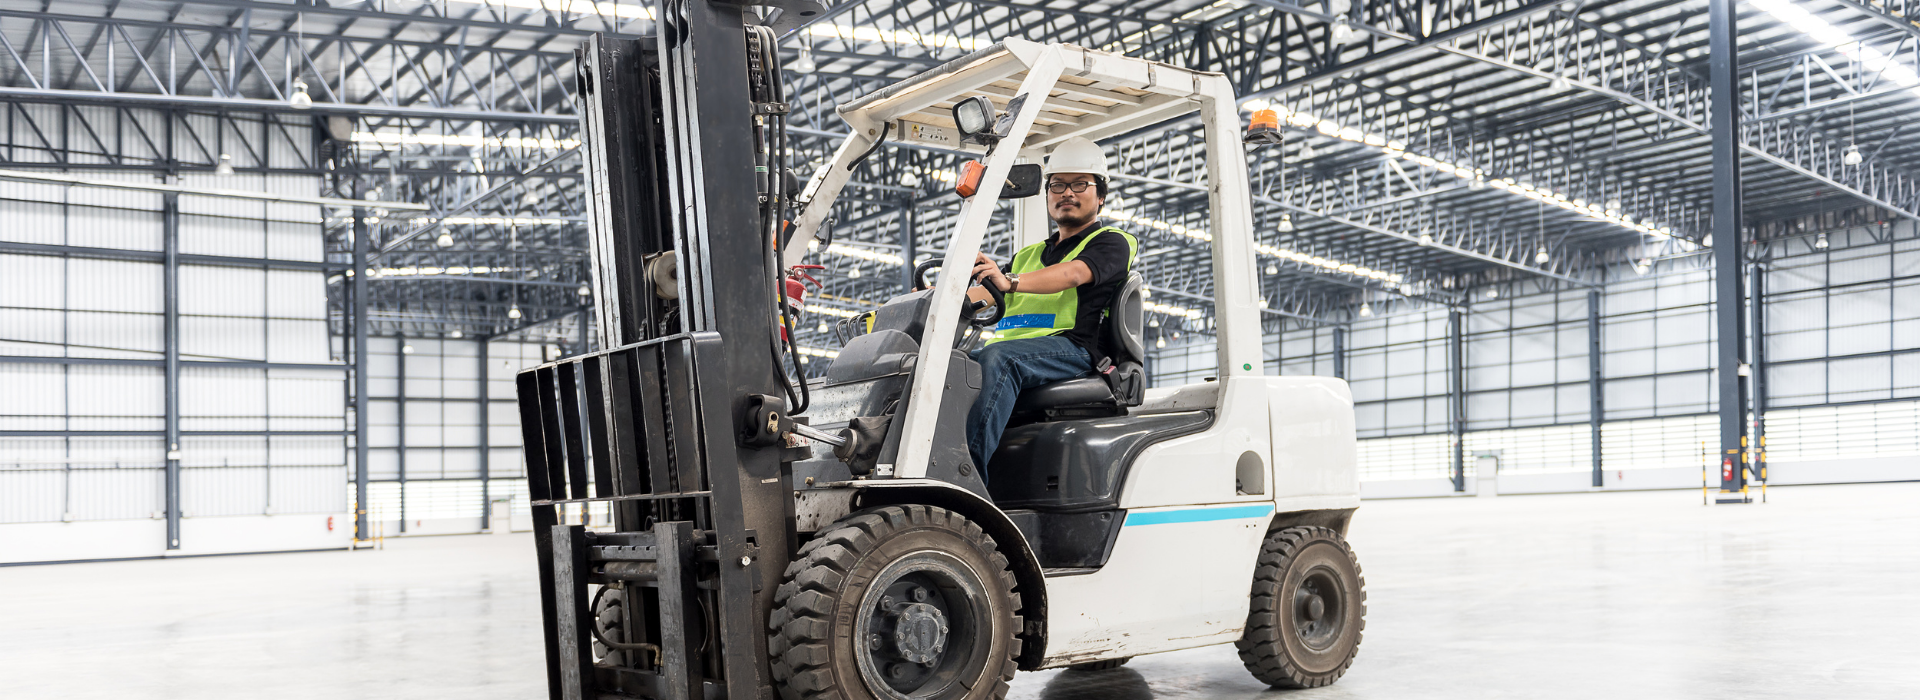 Man on a forklift in a warehouse